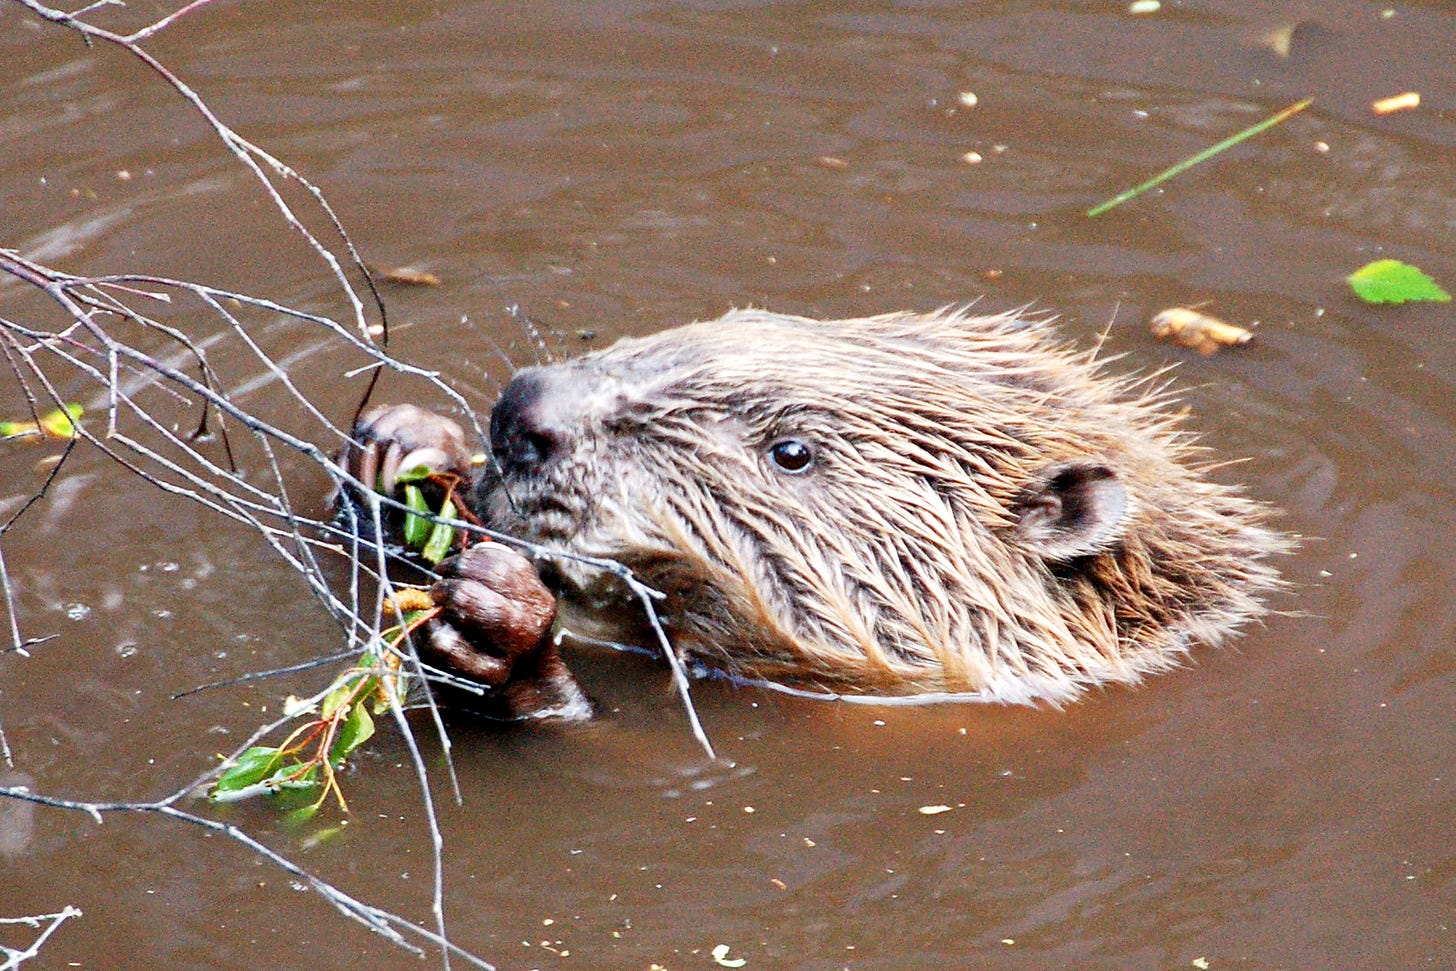 Beaver popping their head above the water, eating leaves off a twig.